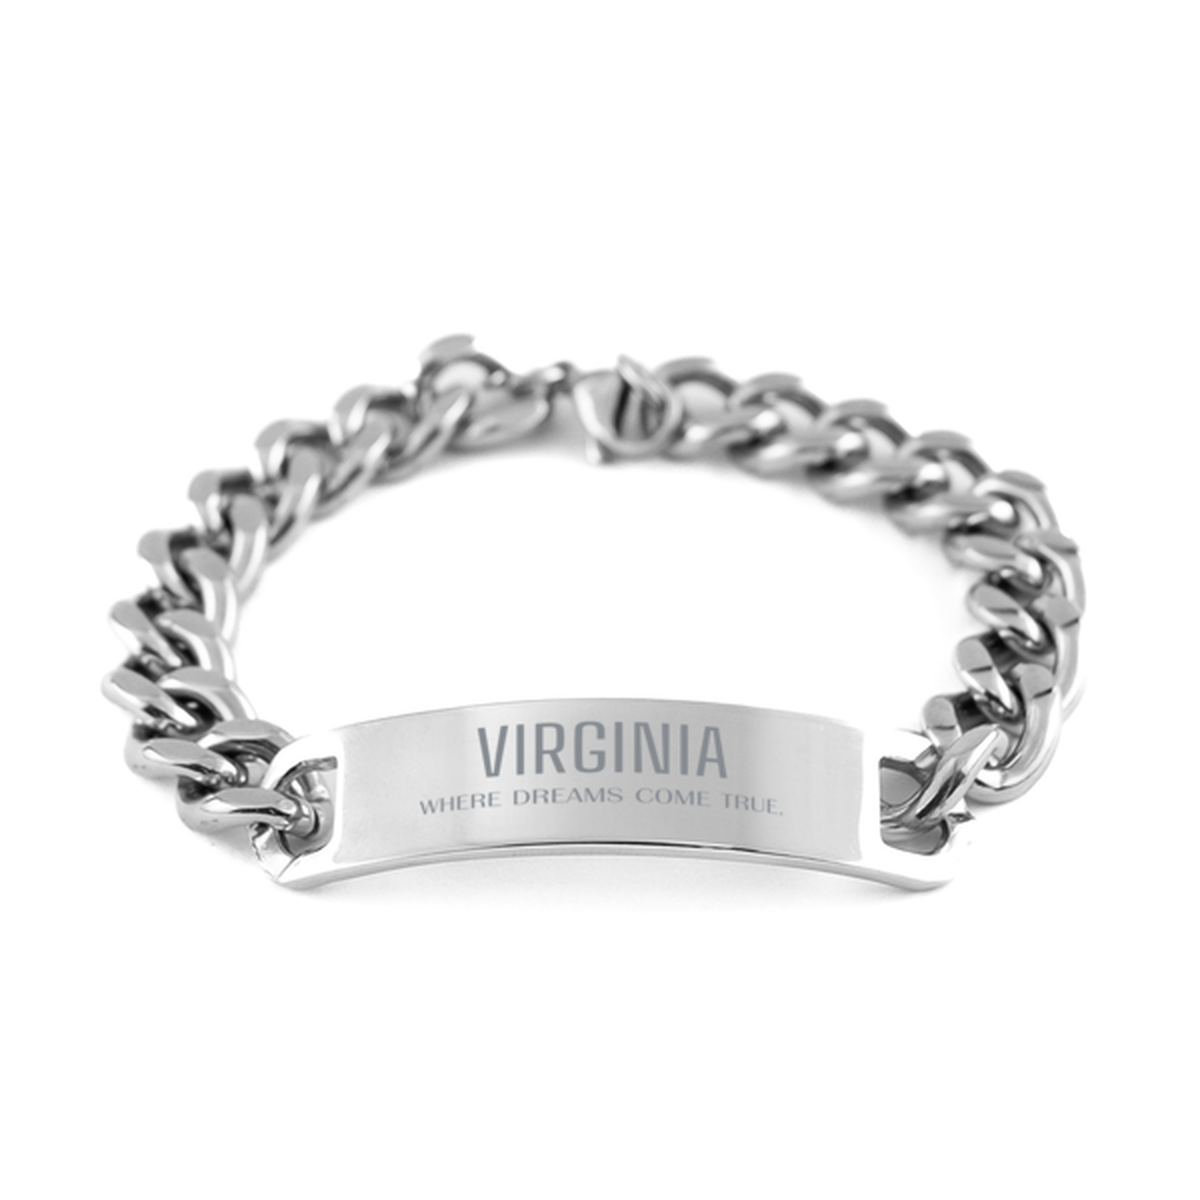 Love Virginia State Cuban Chain Stainless Steel Bracelet, Virginia Where dreams come true, Birthday Inspirational Gifts For Virginia Men, Women, Friends